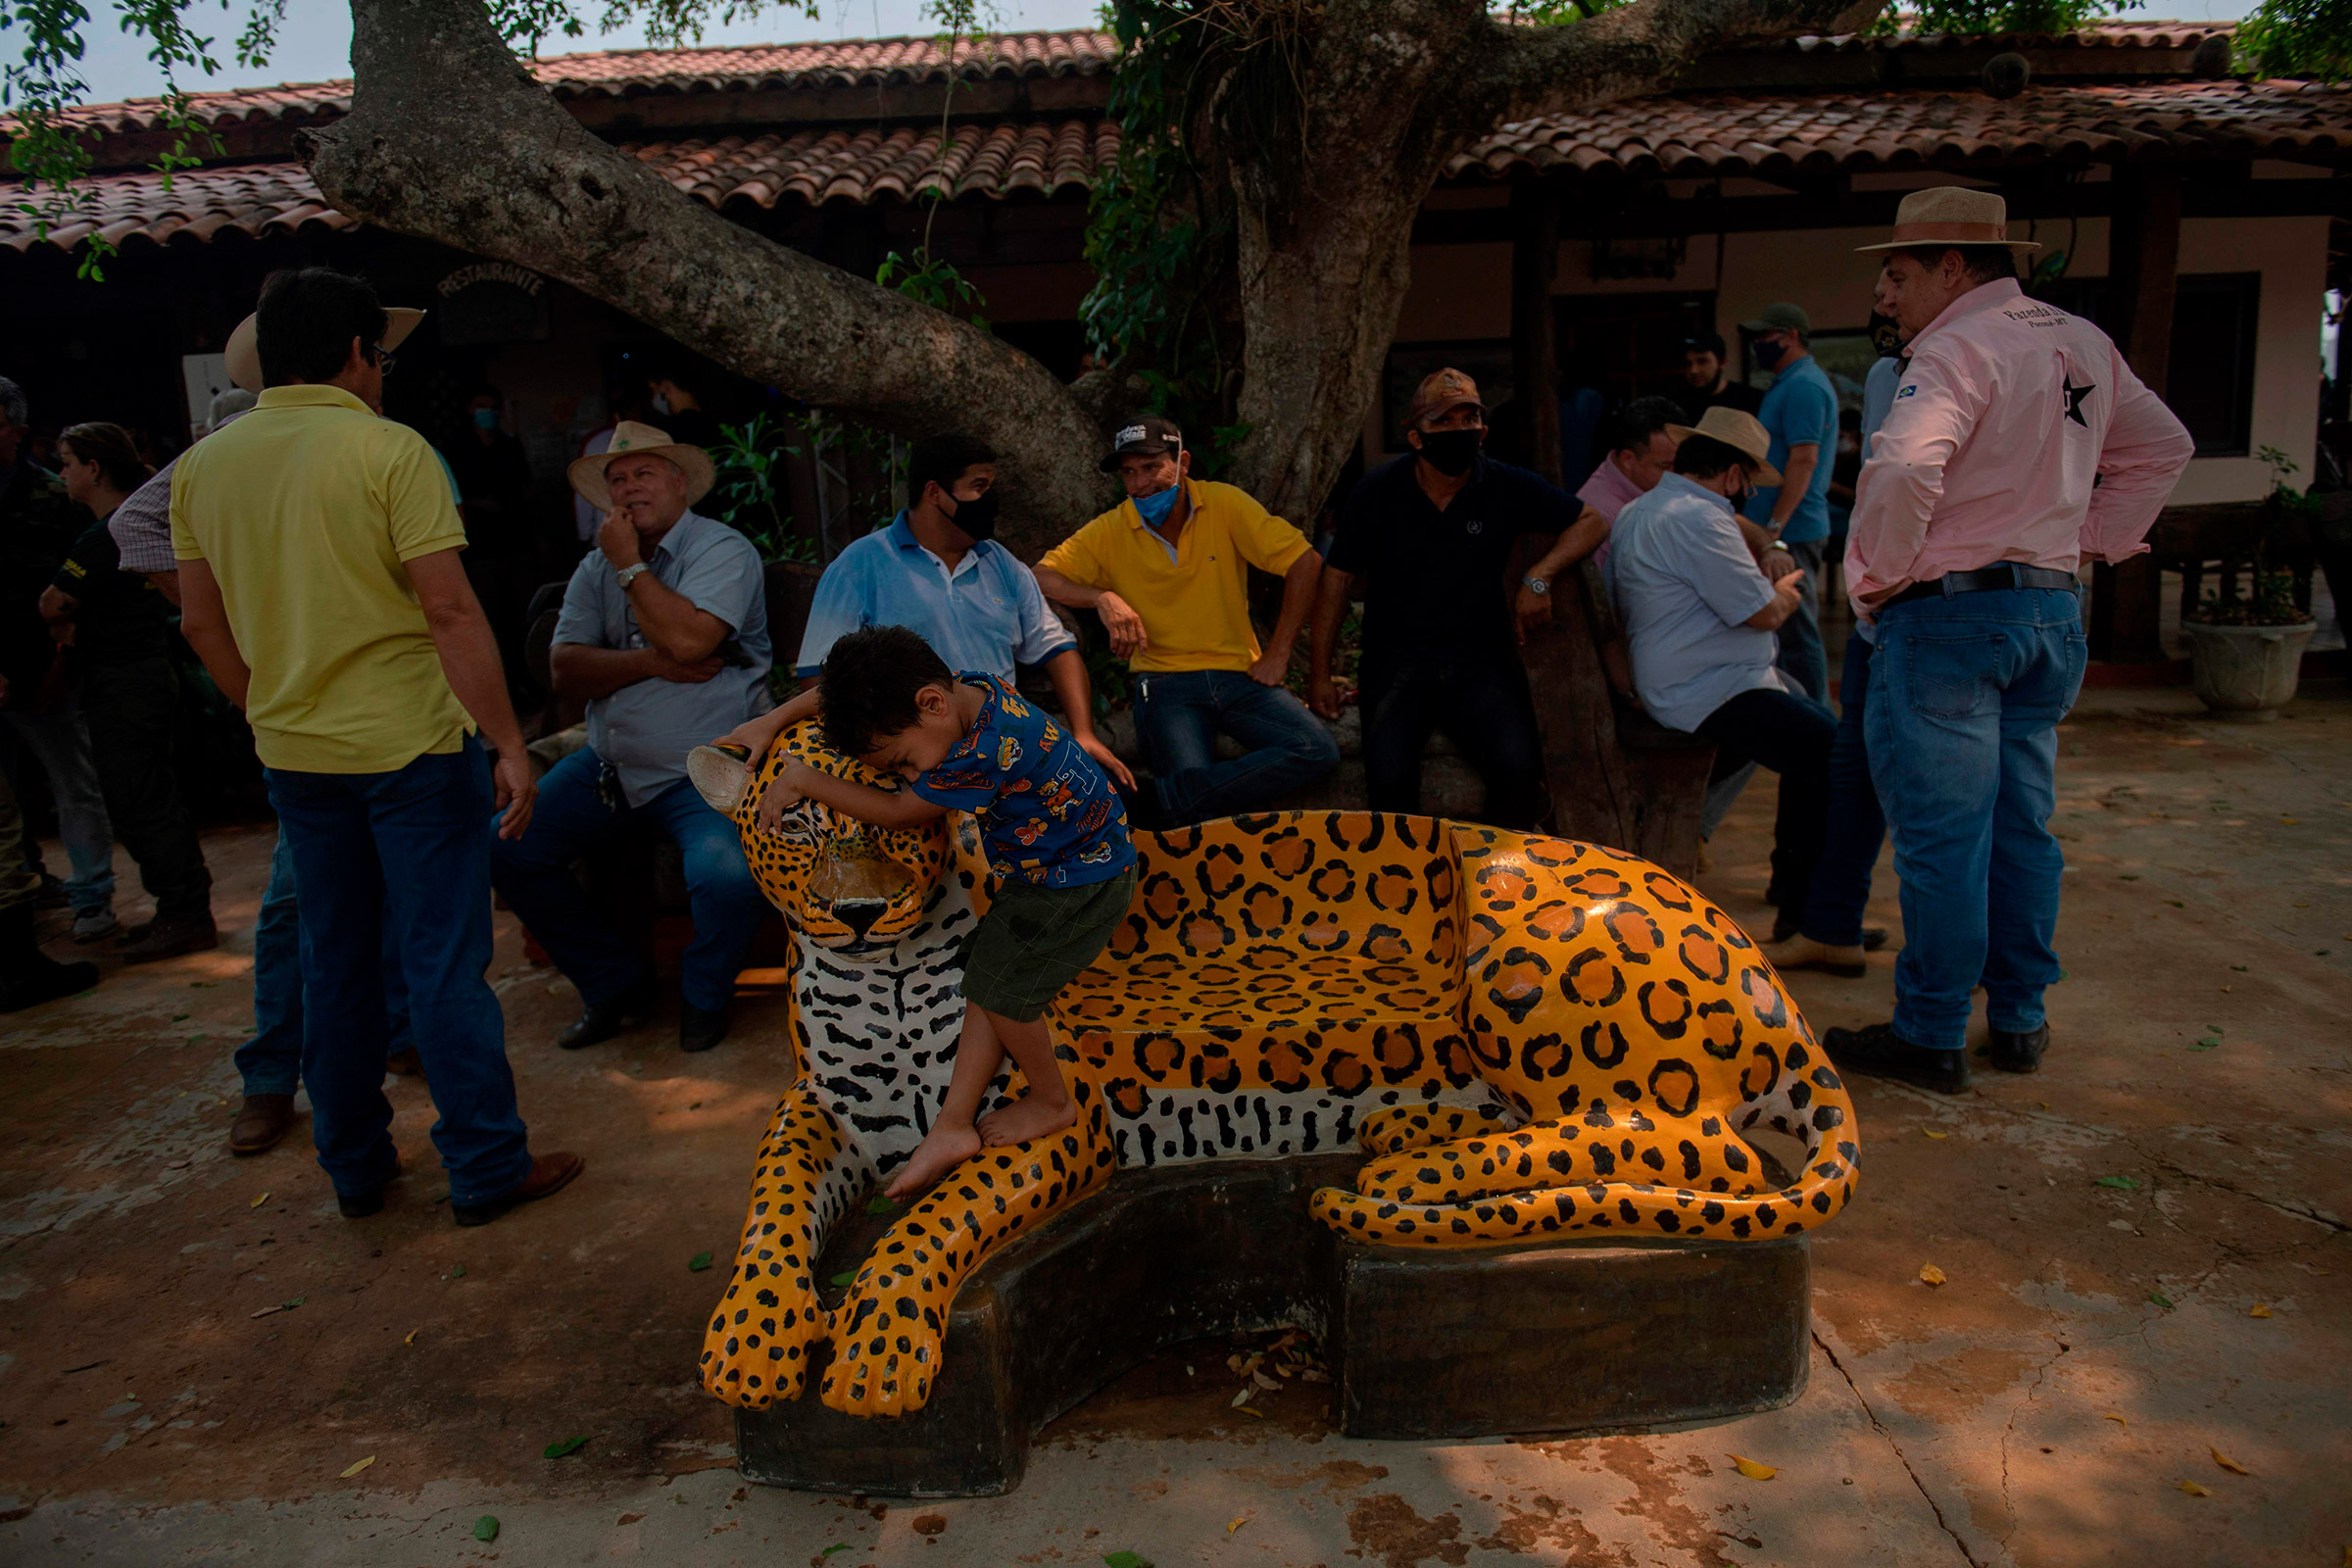 Farmers wait for a meeting with politicians on Sept. 19 to discuss the record fires in the Pantanal during the dry season. (Mauro Pimentel—AFP/Getty Images)